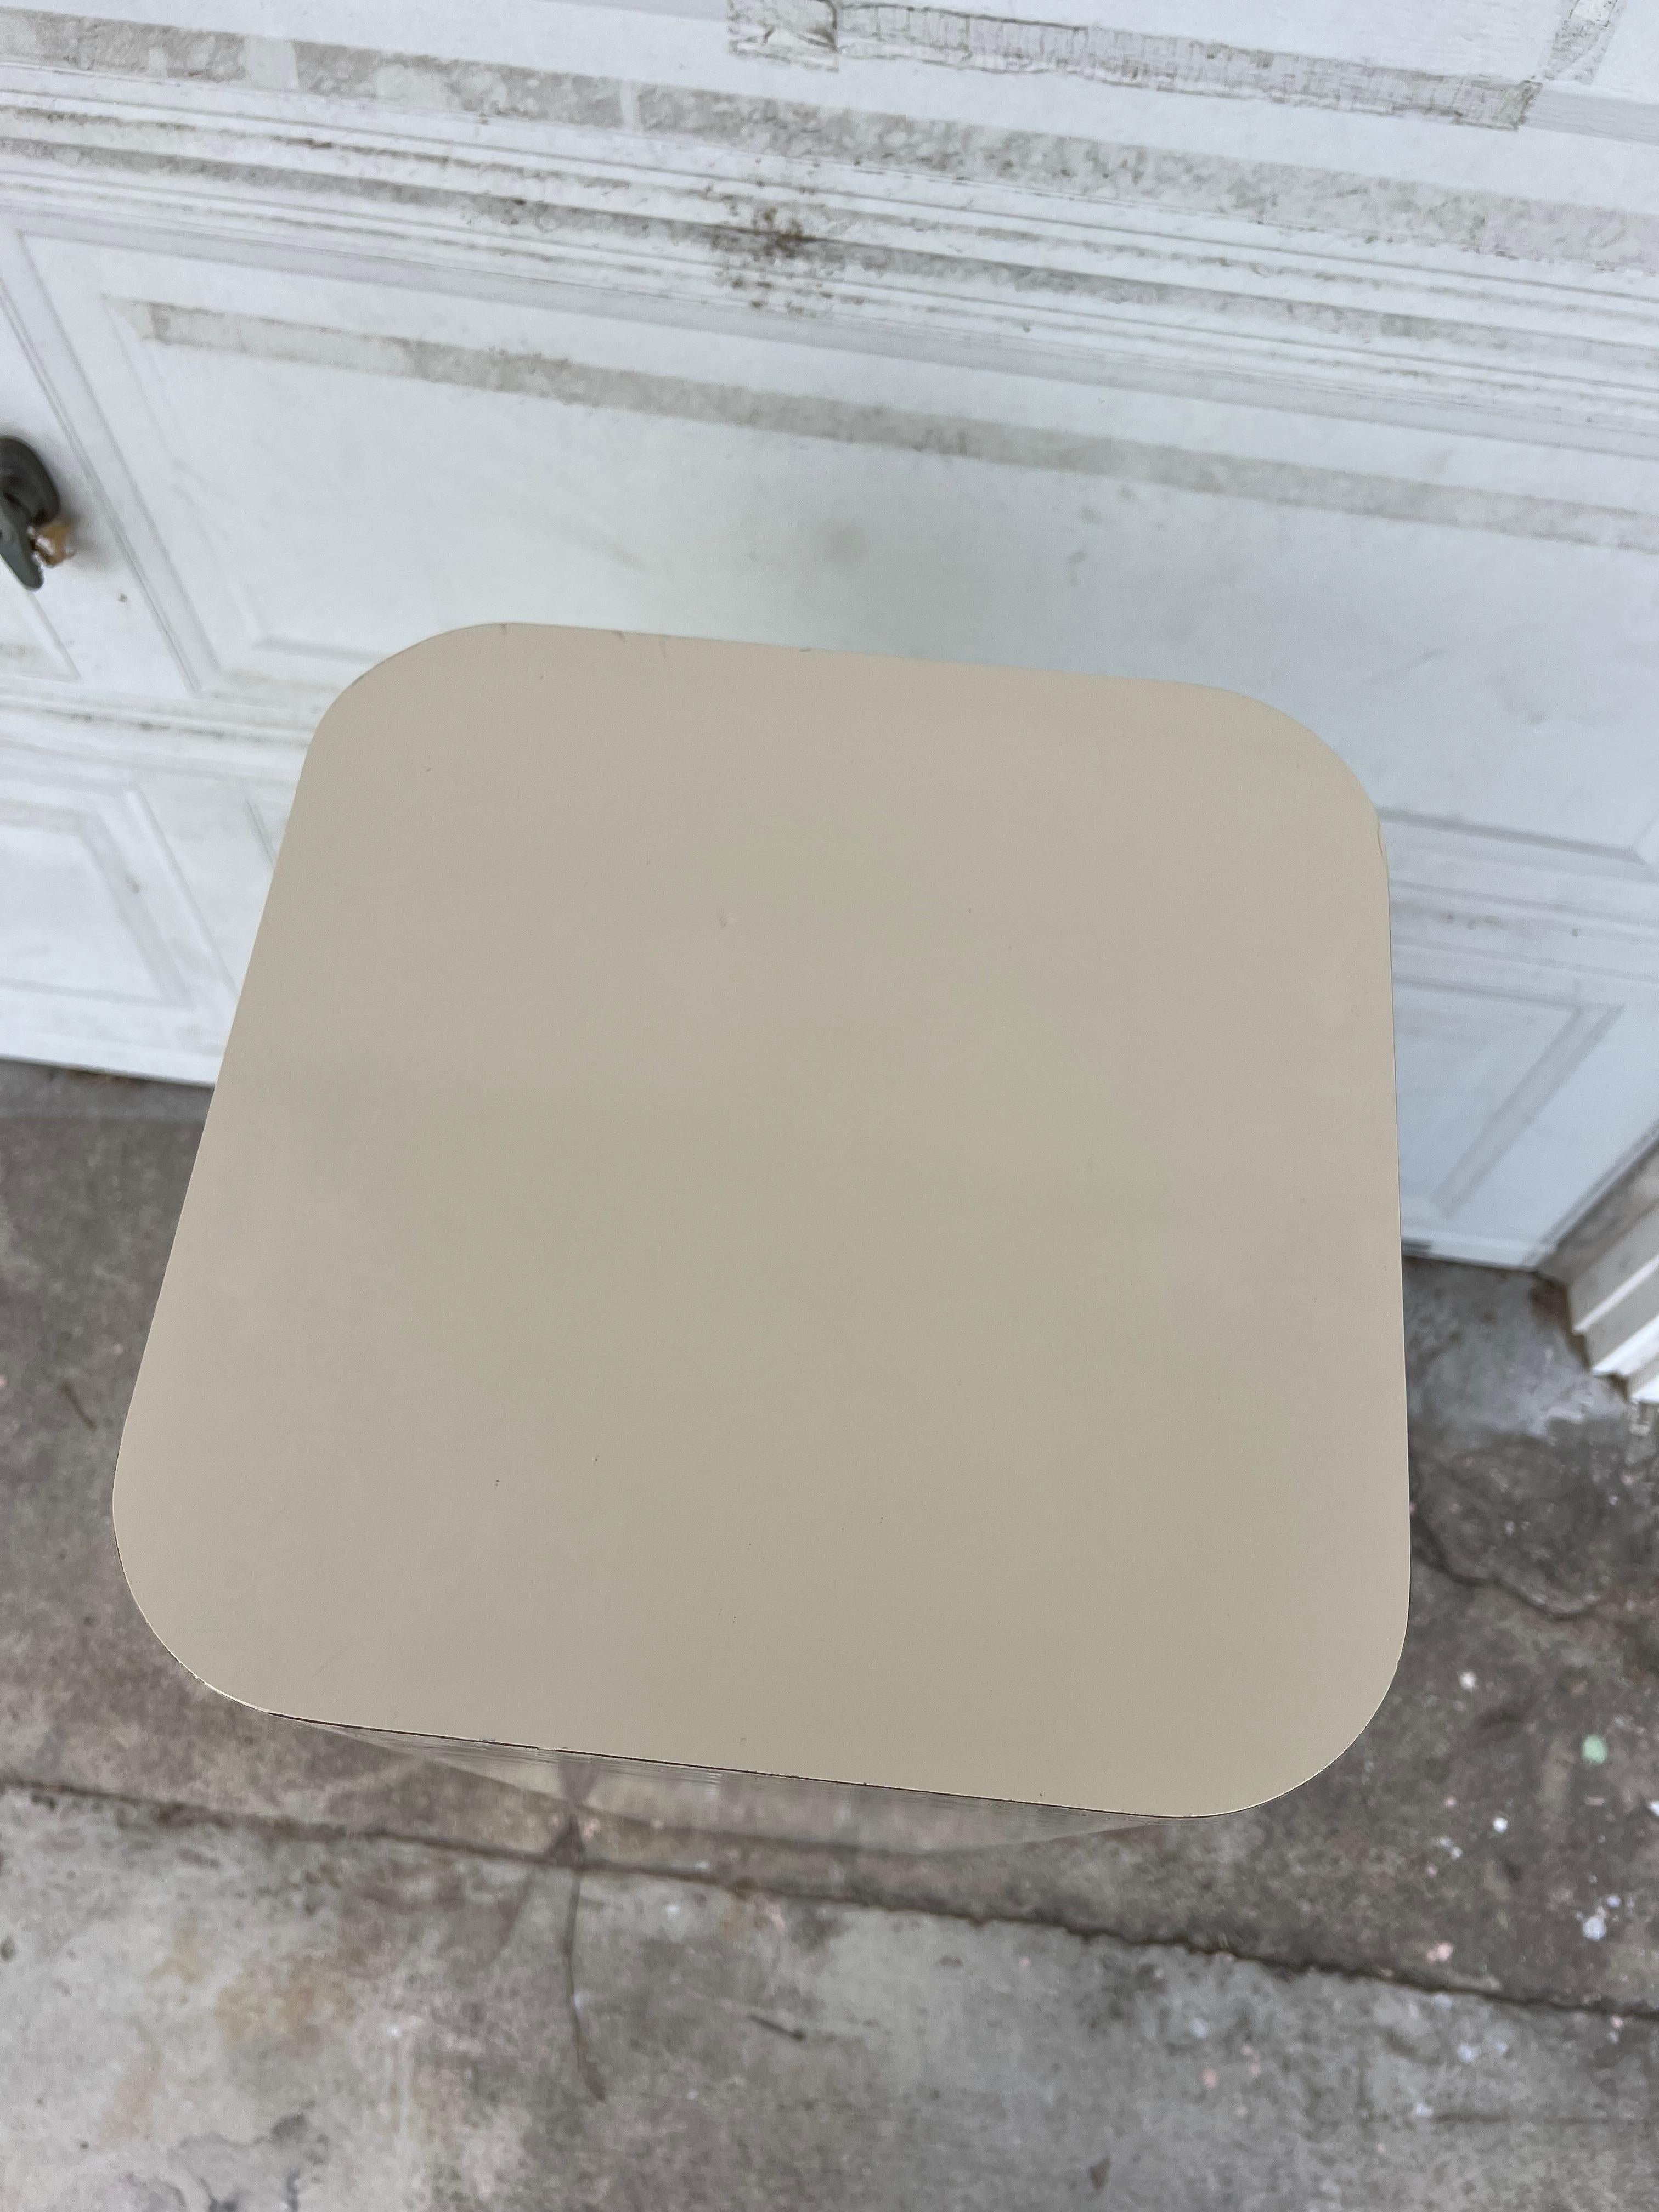 Sleek ivory laminate pedestal stand approximately 42” high. Rounded edges on the square’s corners. Overall very good vintage condition, minimal scrapes or chips- please see all media in posting for any flaws. Metal (chrome) feet attached on the